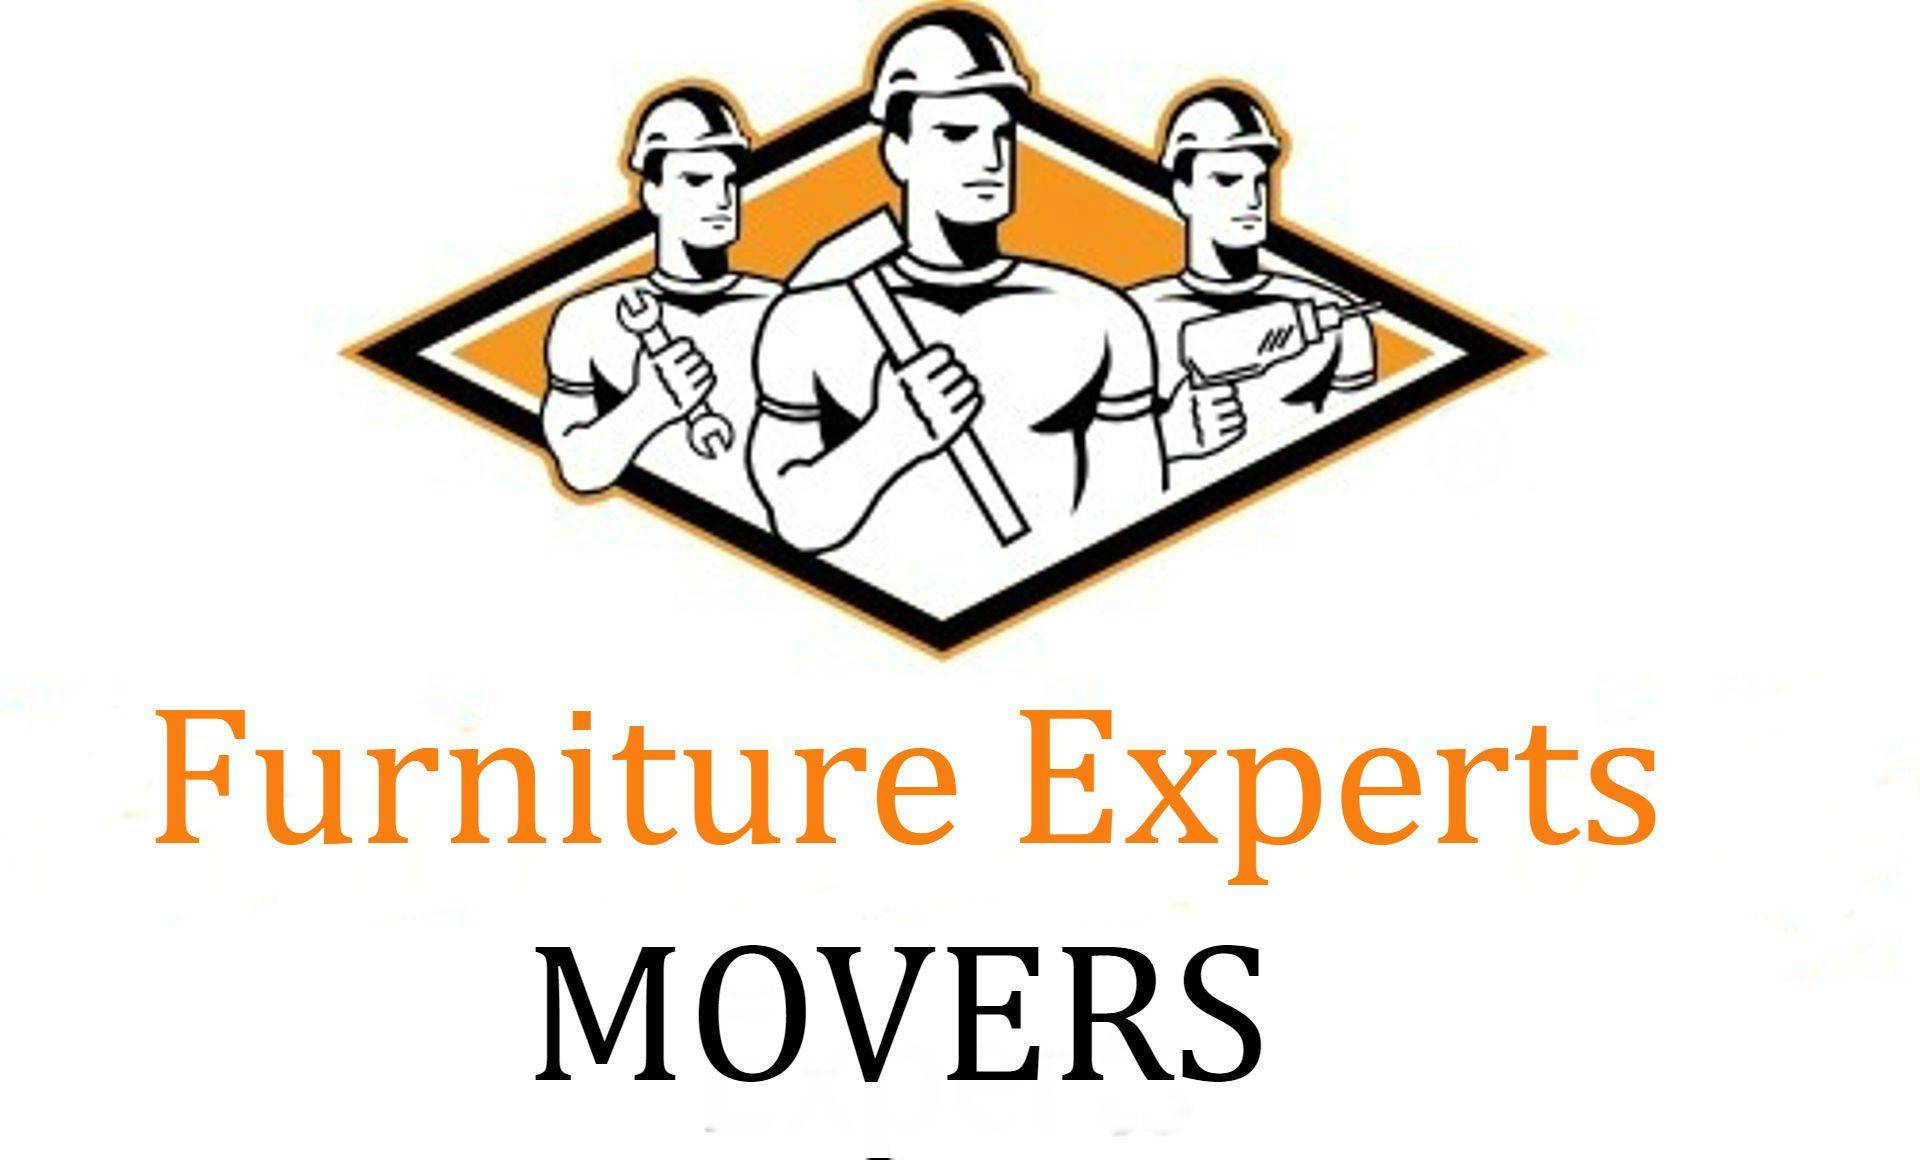 Furniture Experts Movers